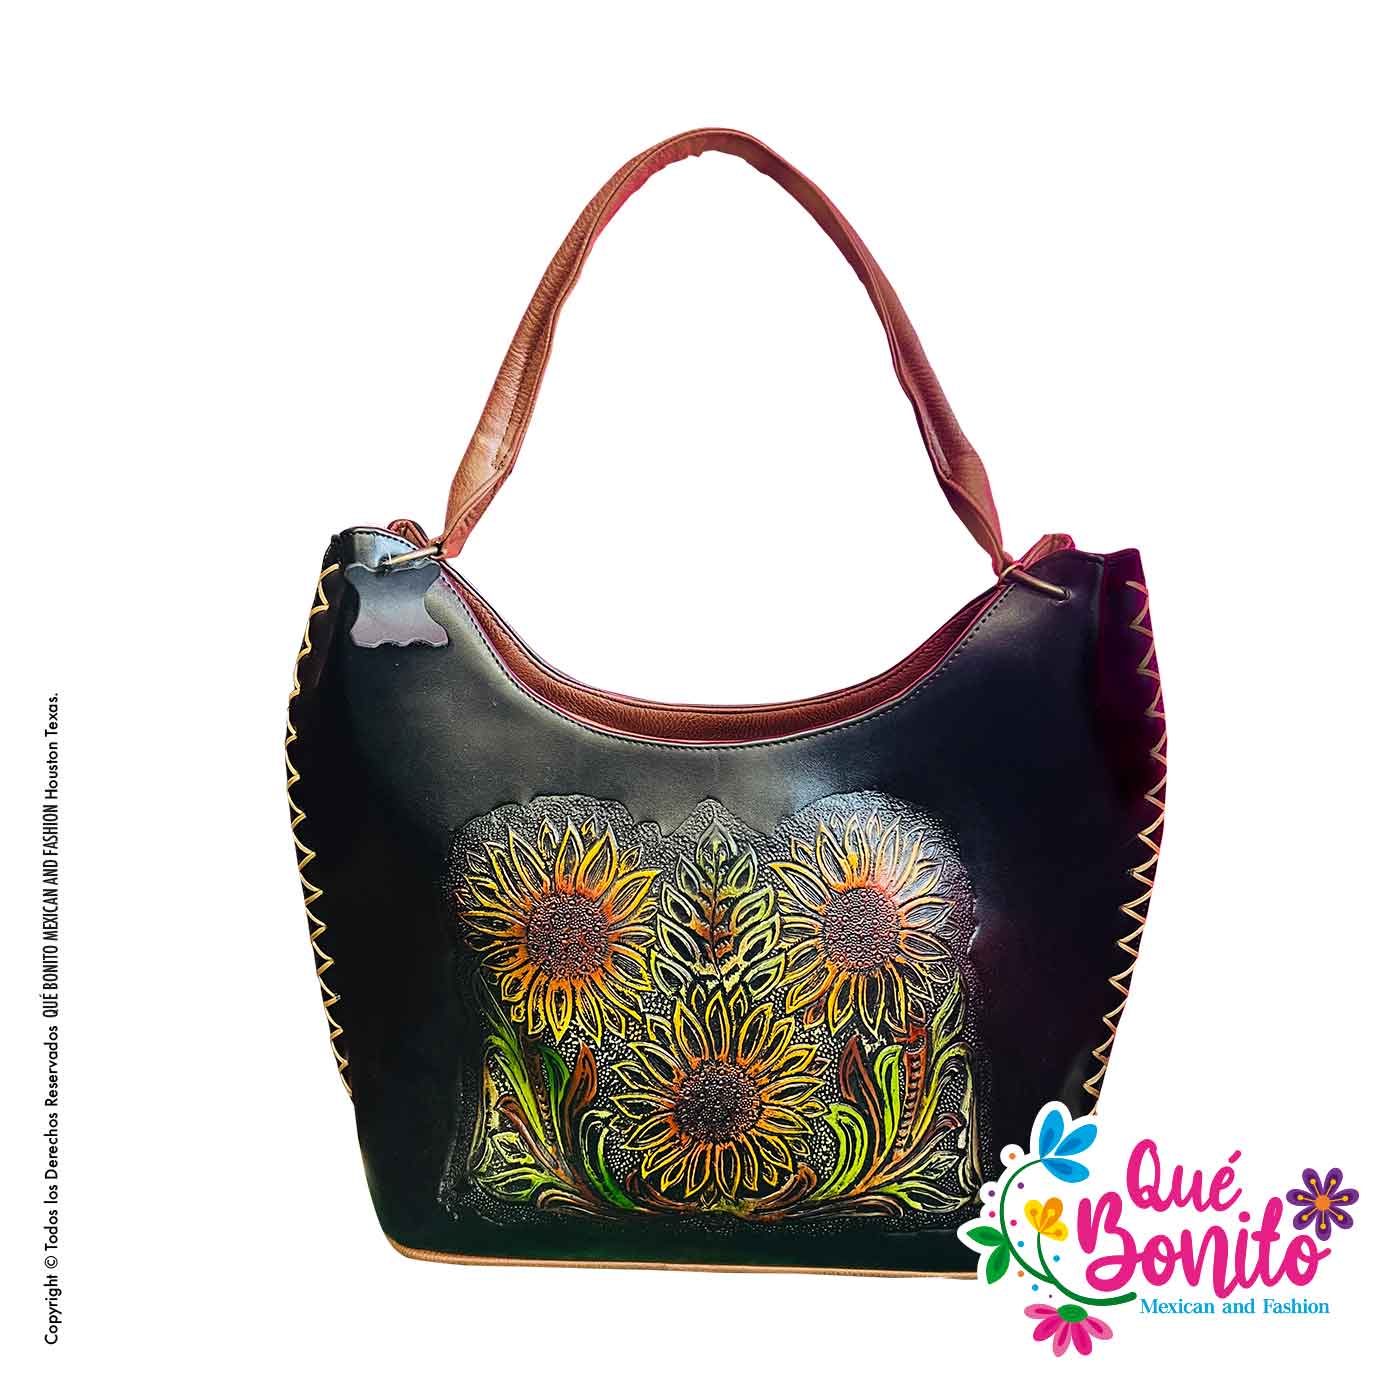 The Sunflowers LEATHER purse Que Bonito Mexican and Fashion